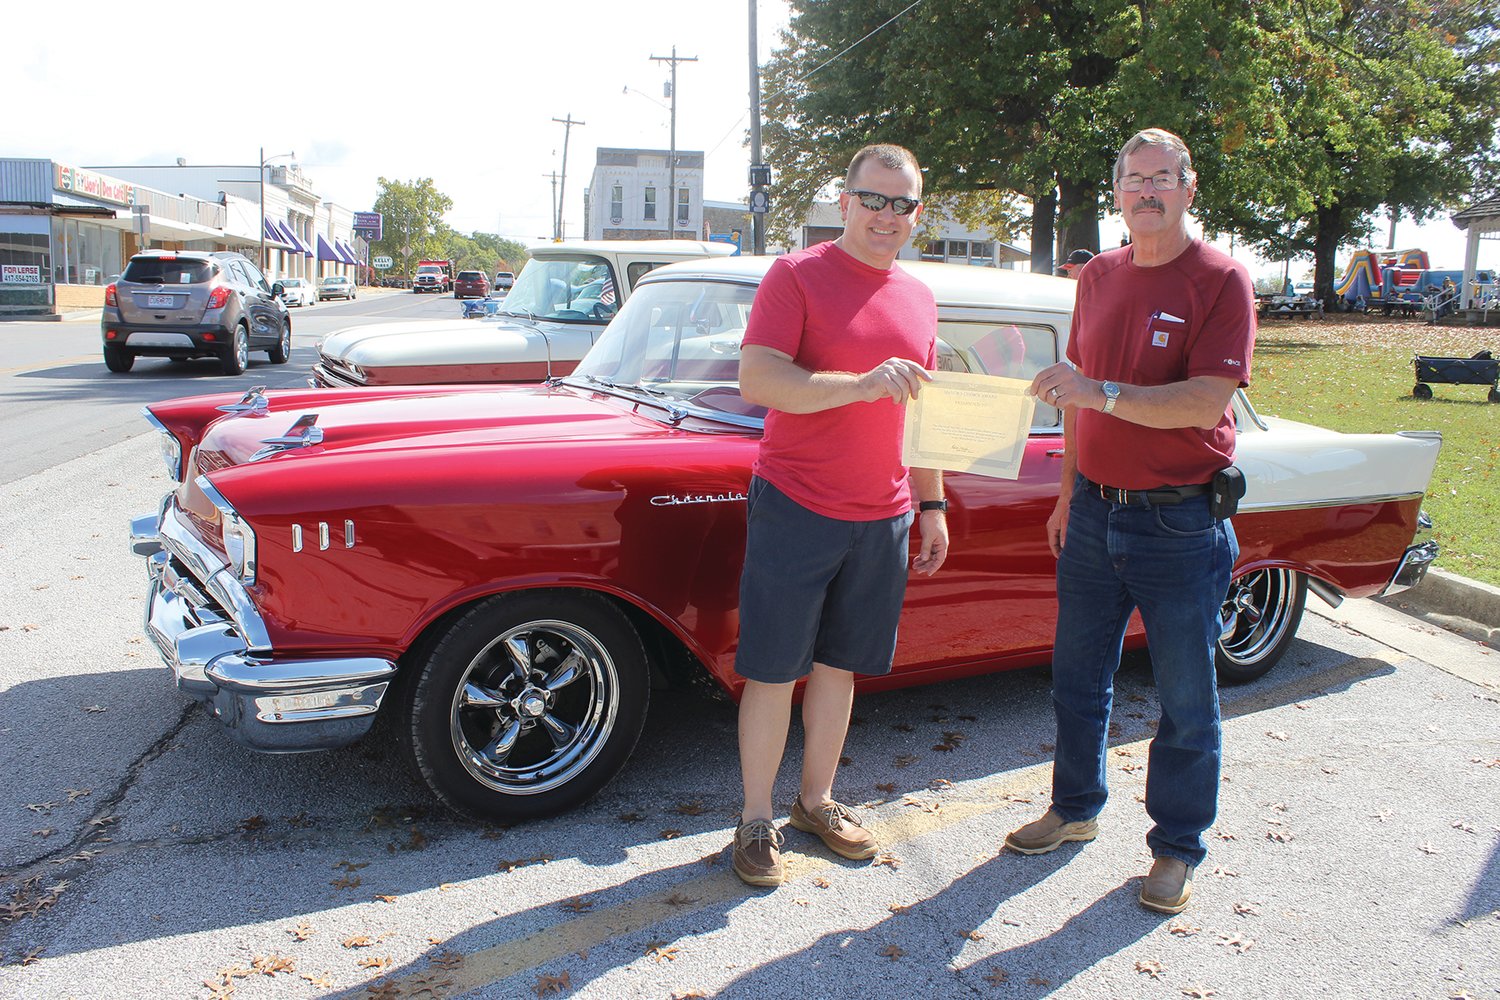 City of Mansfield Mayor Blake Miller presents the Mayor’s Choice Award to Gary Corder in front of Corder’s 1957 Chevy.